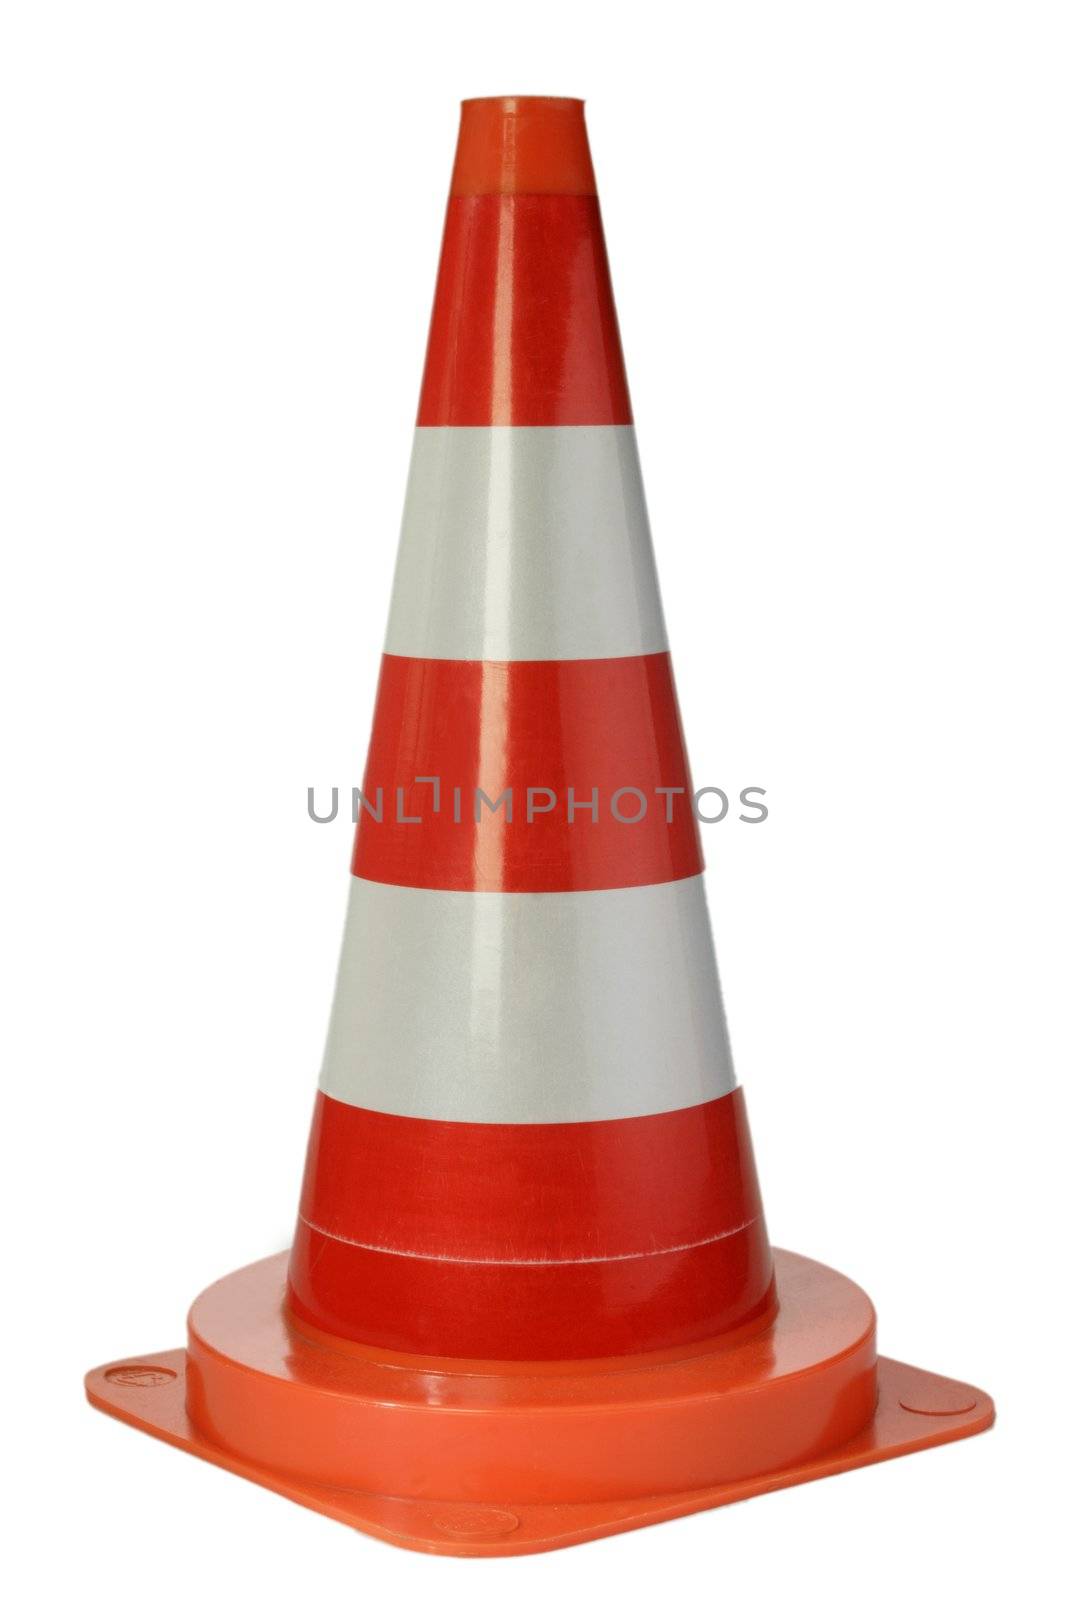 Danger cone isolated on white background
